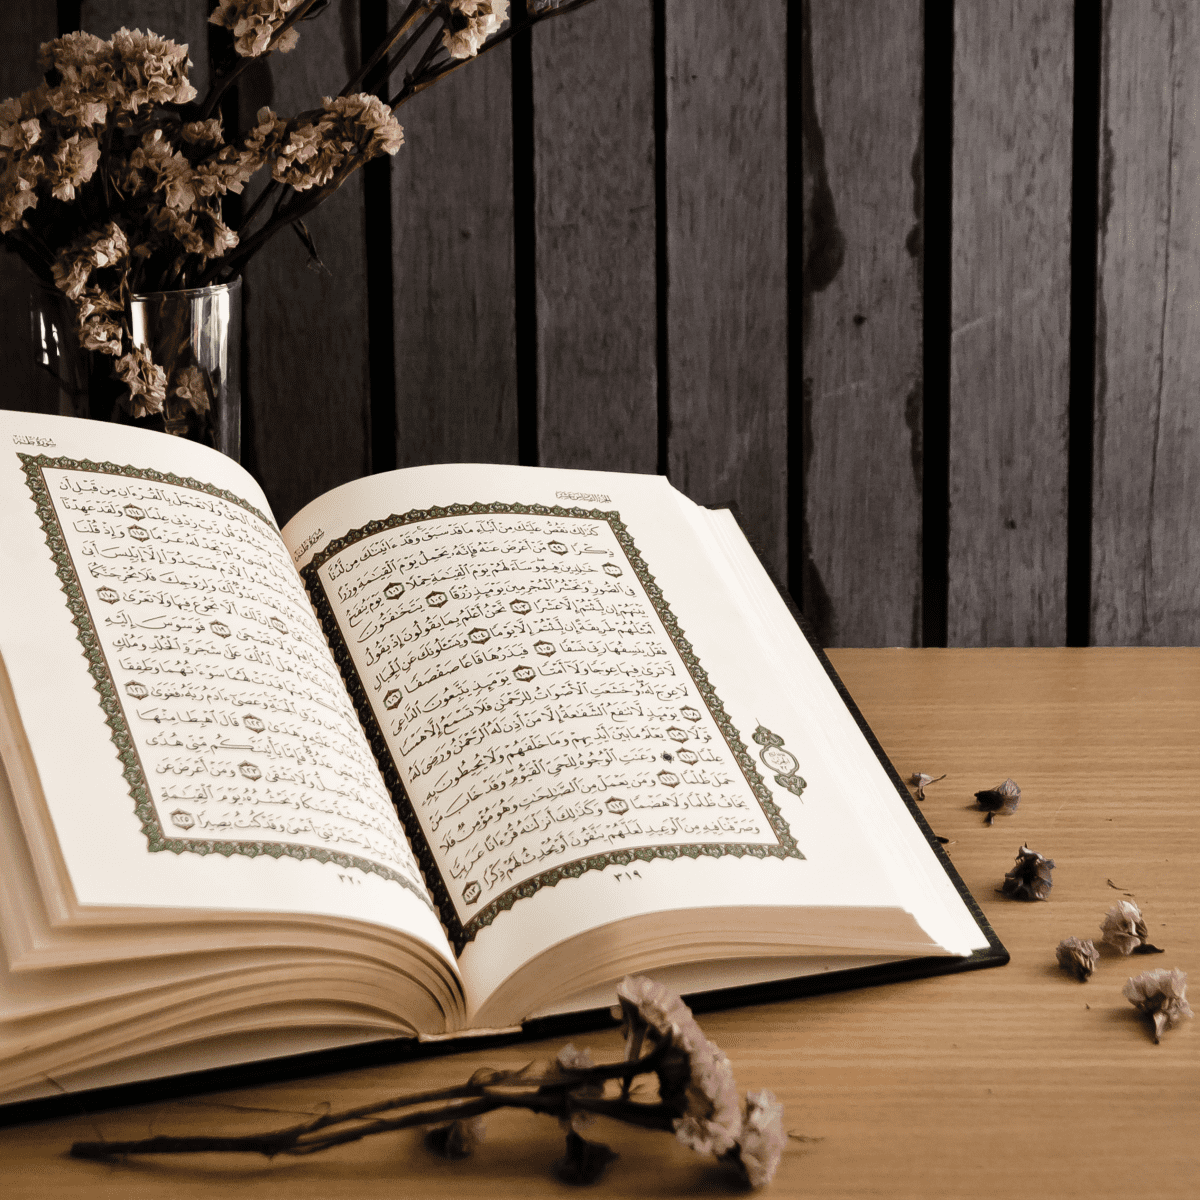 What Does Islam Say About Giving Gifts? - The Muslim Vibe